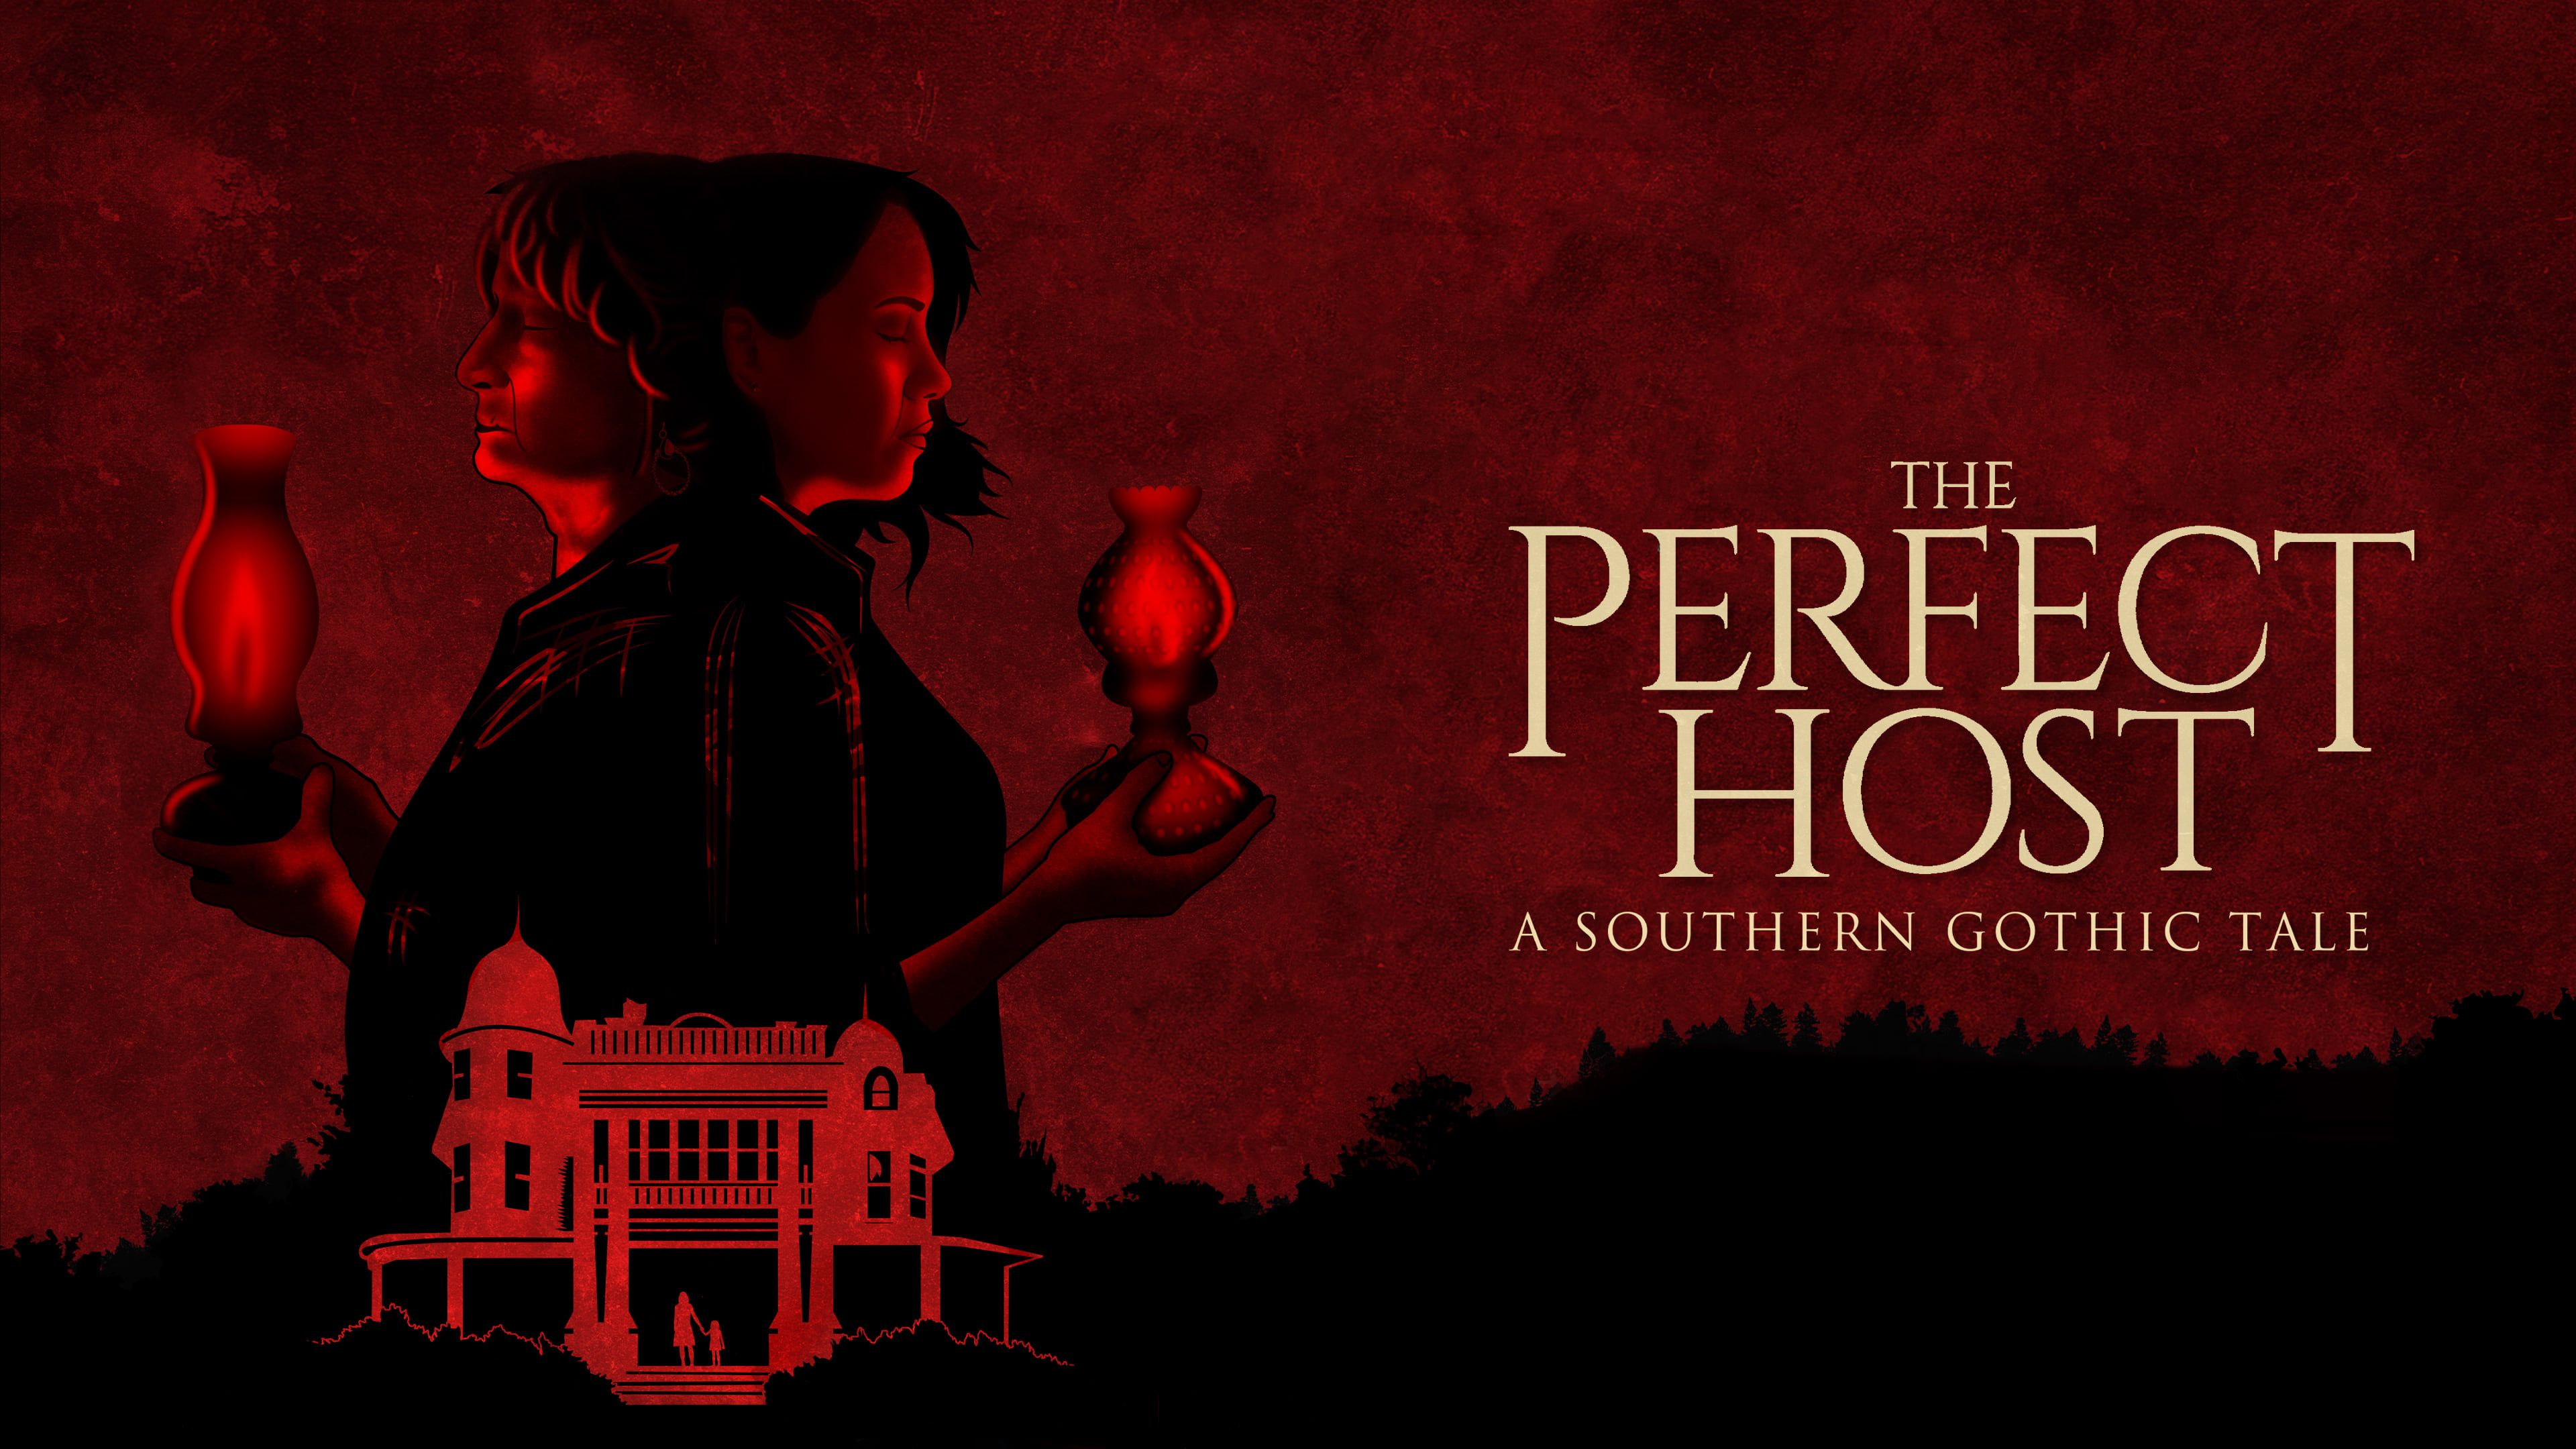 The perfect host a southern gothic tale